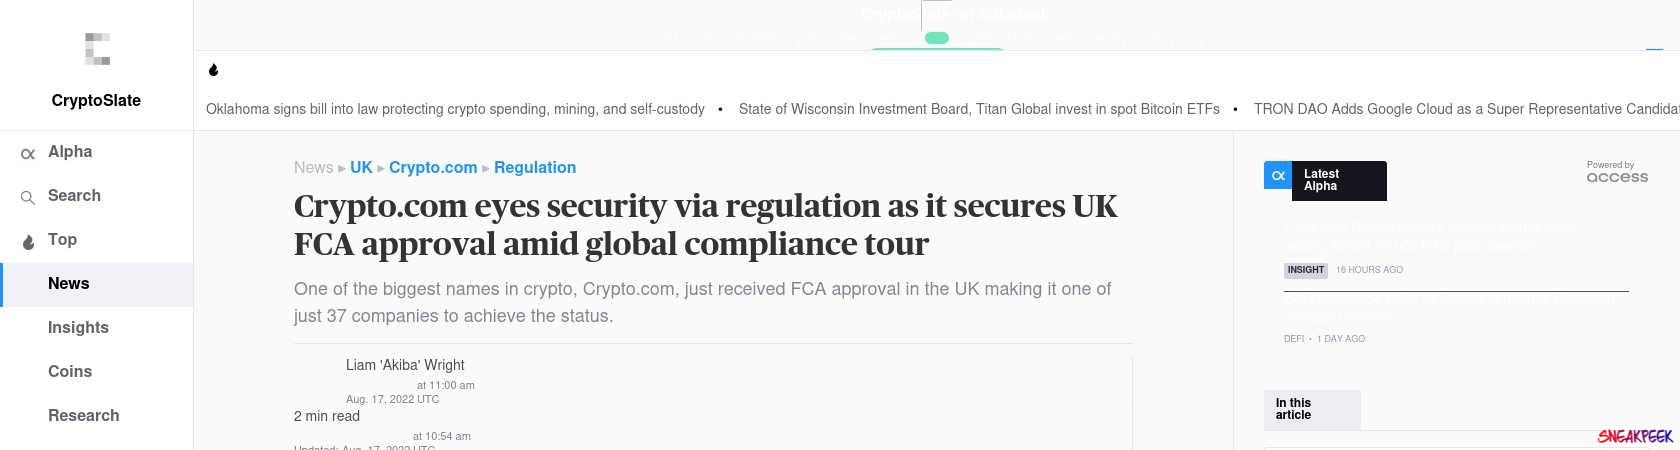 Read the full Article:  ⭲ Crypto.com eyes security via regulation as it secures UK FCA approval amid global compliance tour